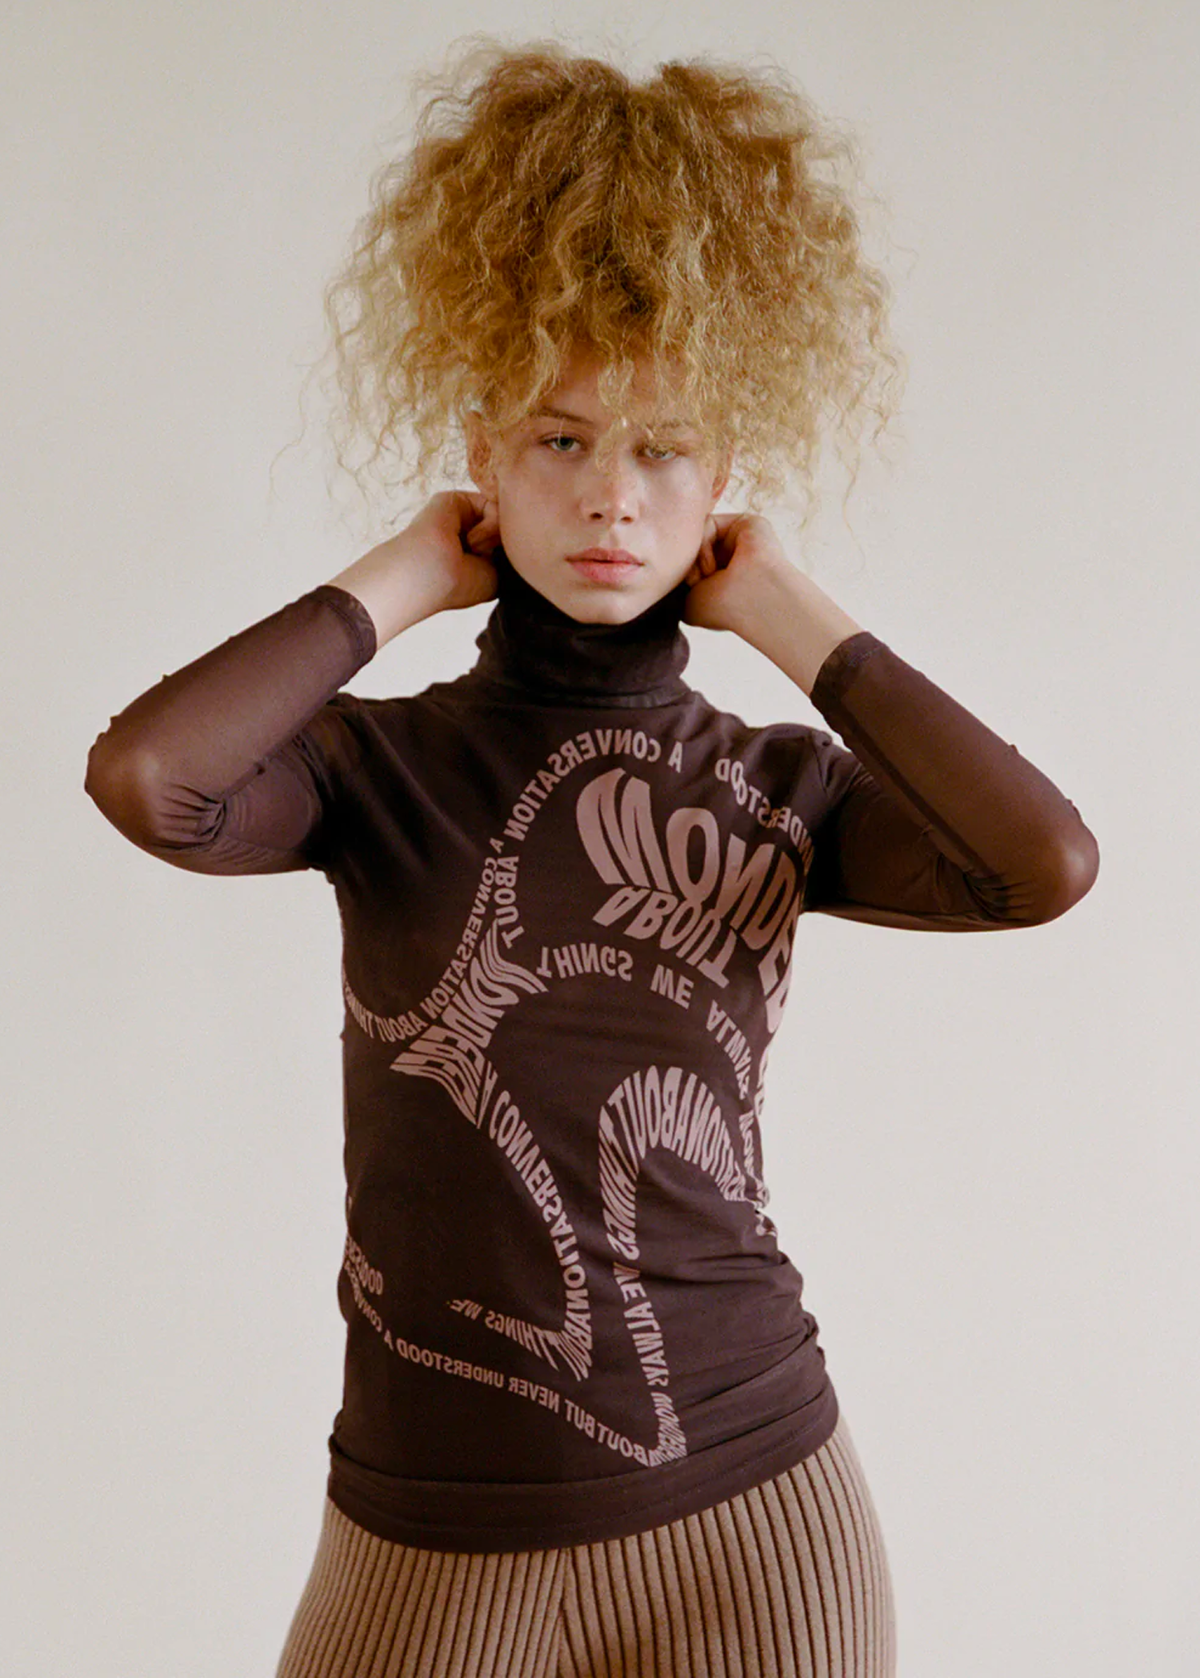 70s 90s inspired slinky stretch brown mesh turtleneck top with typeface graphics at front by Rationalle